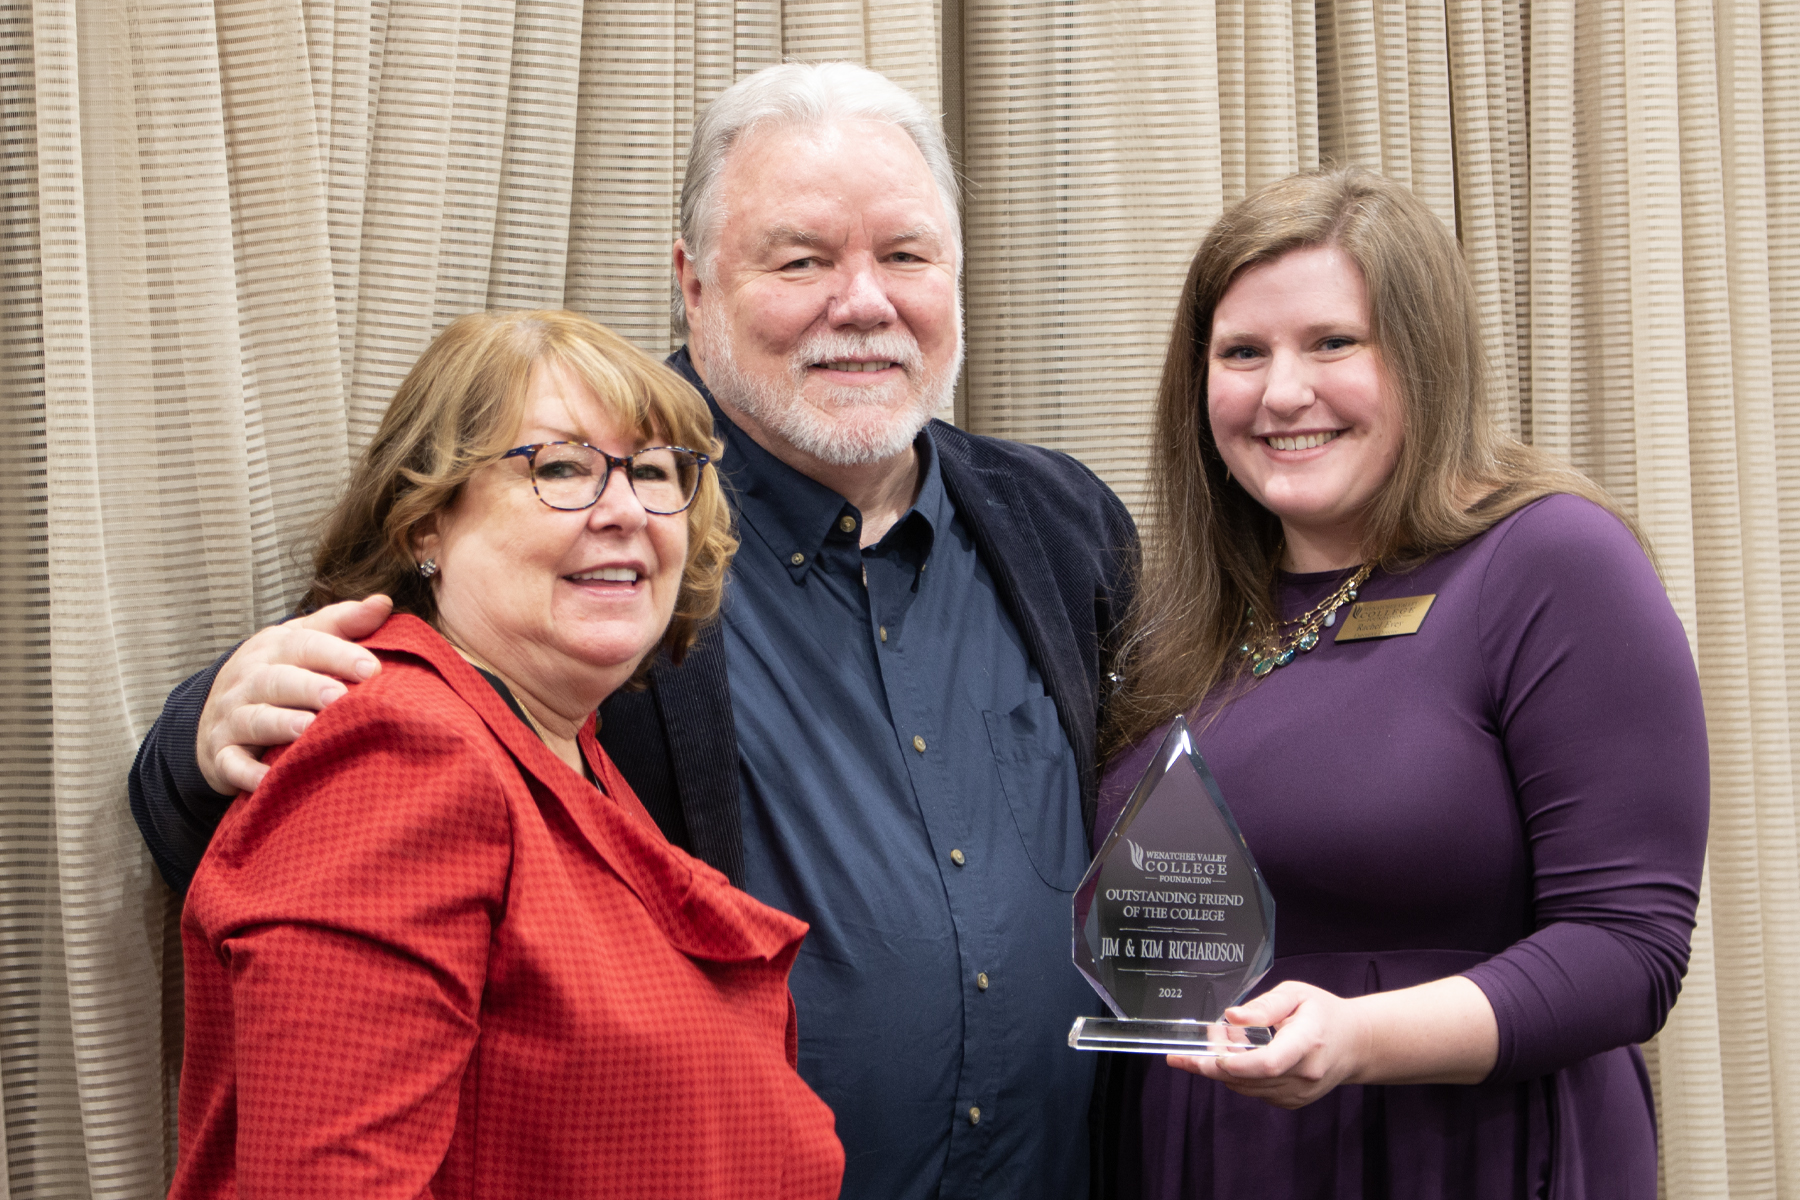 Kim Richardson, Jim Richardson and Rachel Evey holding Outstanding Friends of the College Award